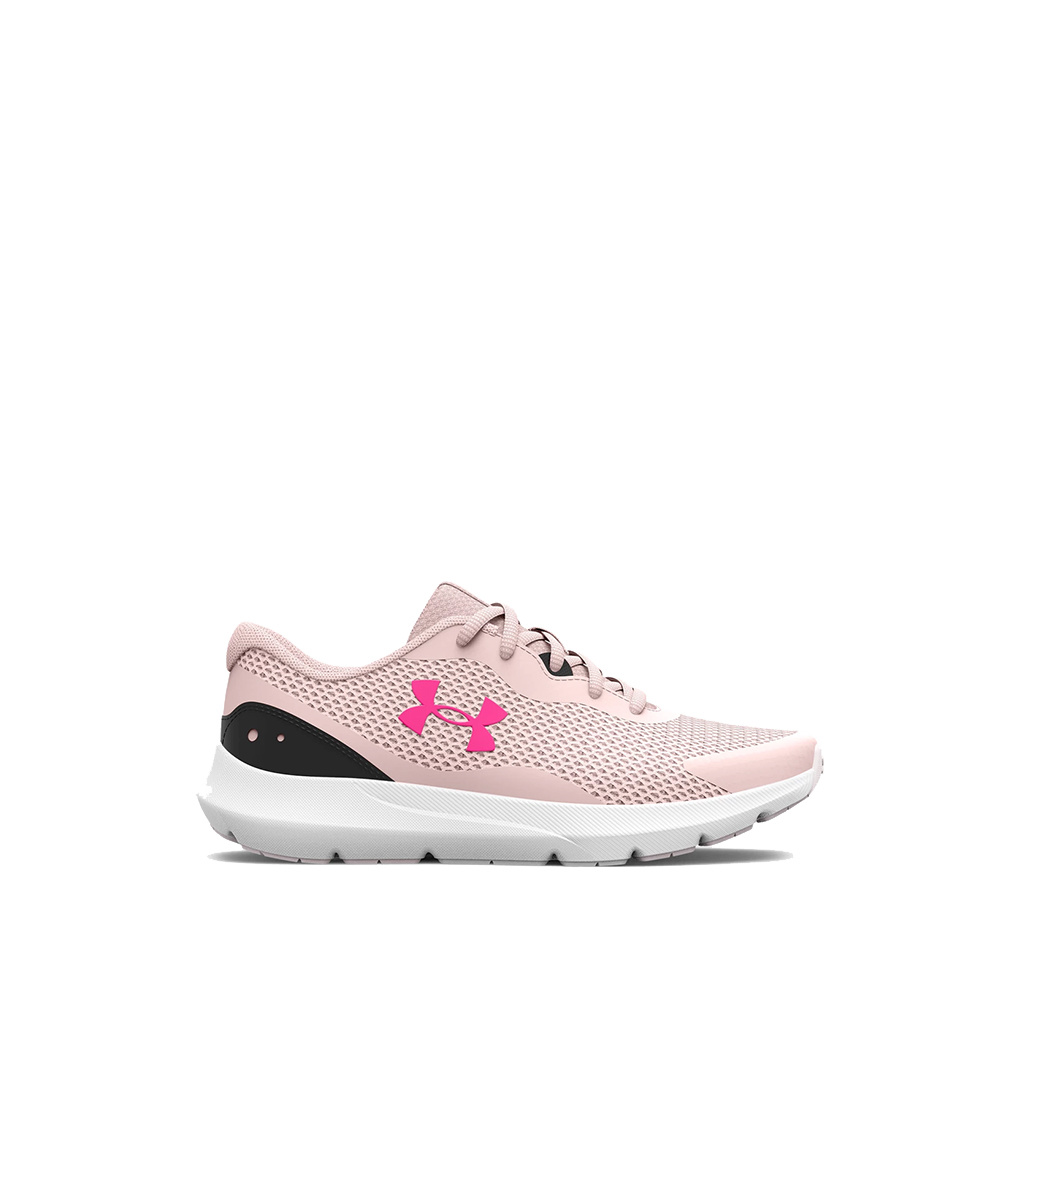 prosperidad canto lucha Under Armour Surge 3 Pink Note / White / Electro Pink | Tony Pappas - Tony  Pappas - Footwear store